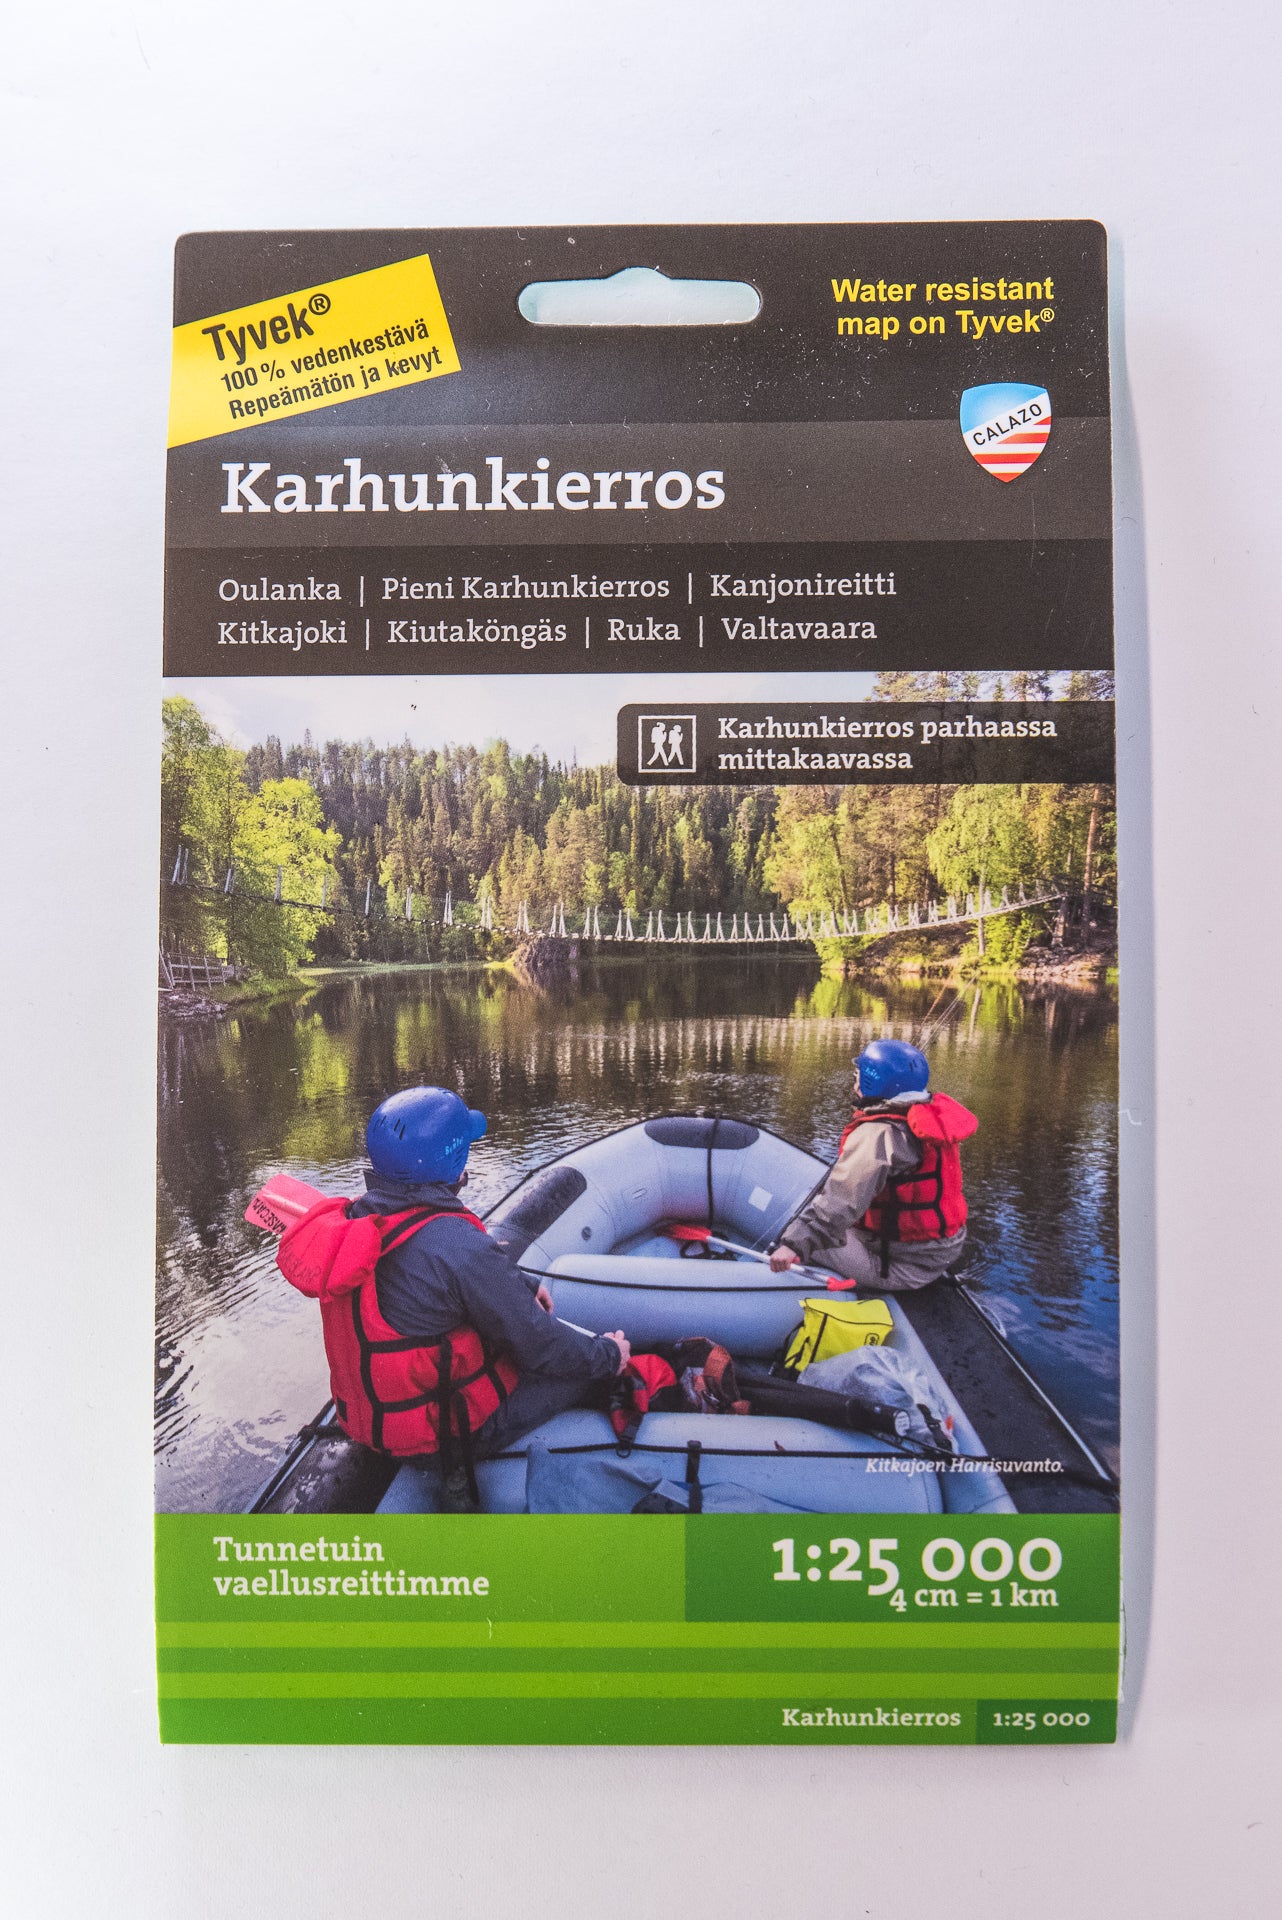 Karhunkierros Trail – Salla -in the middle of nowhere